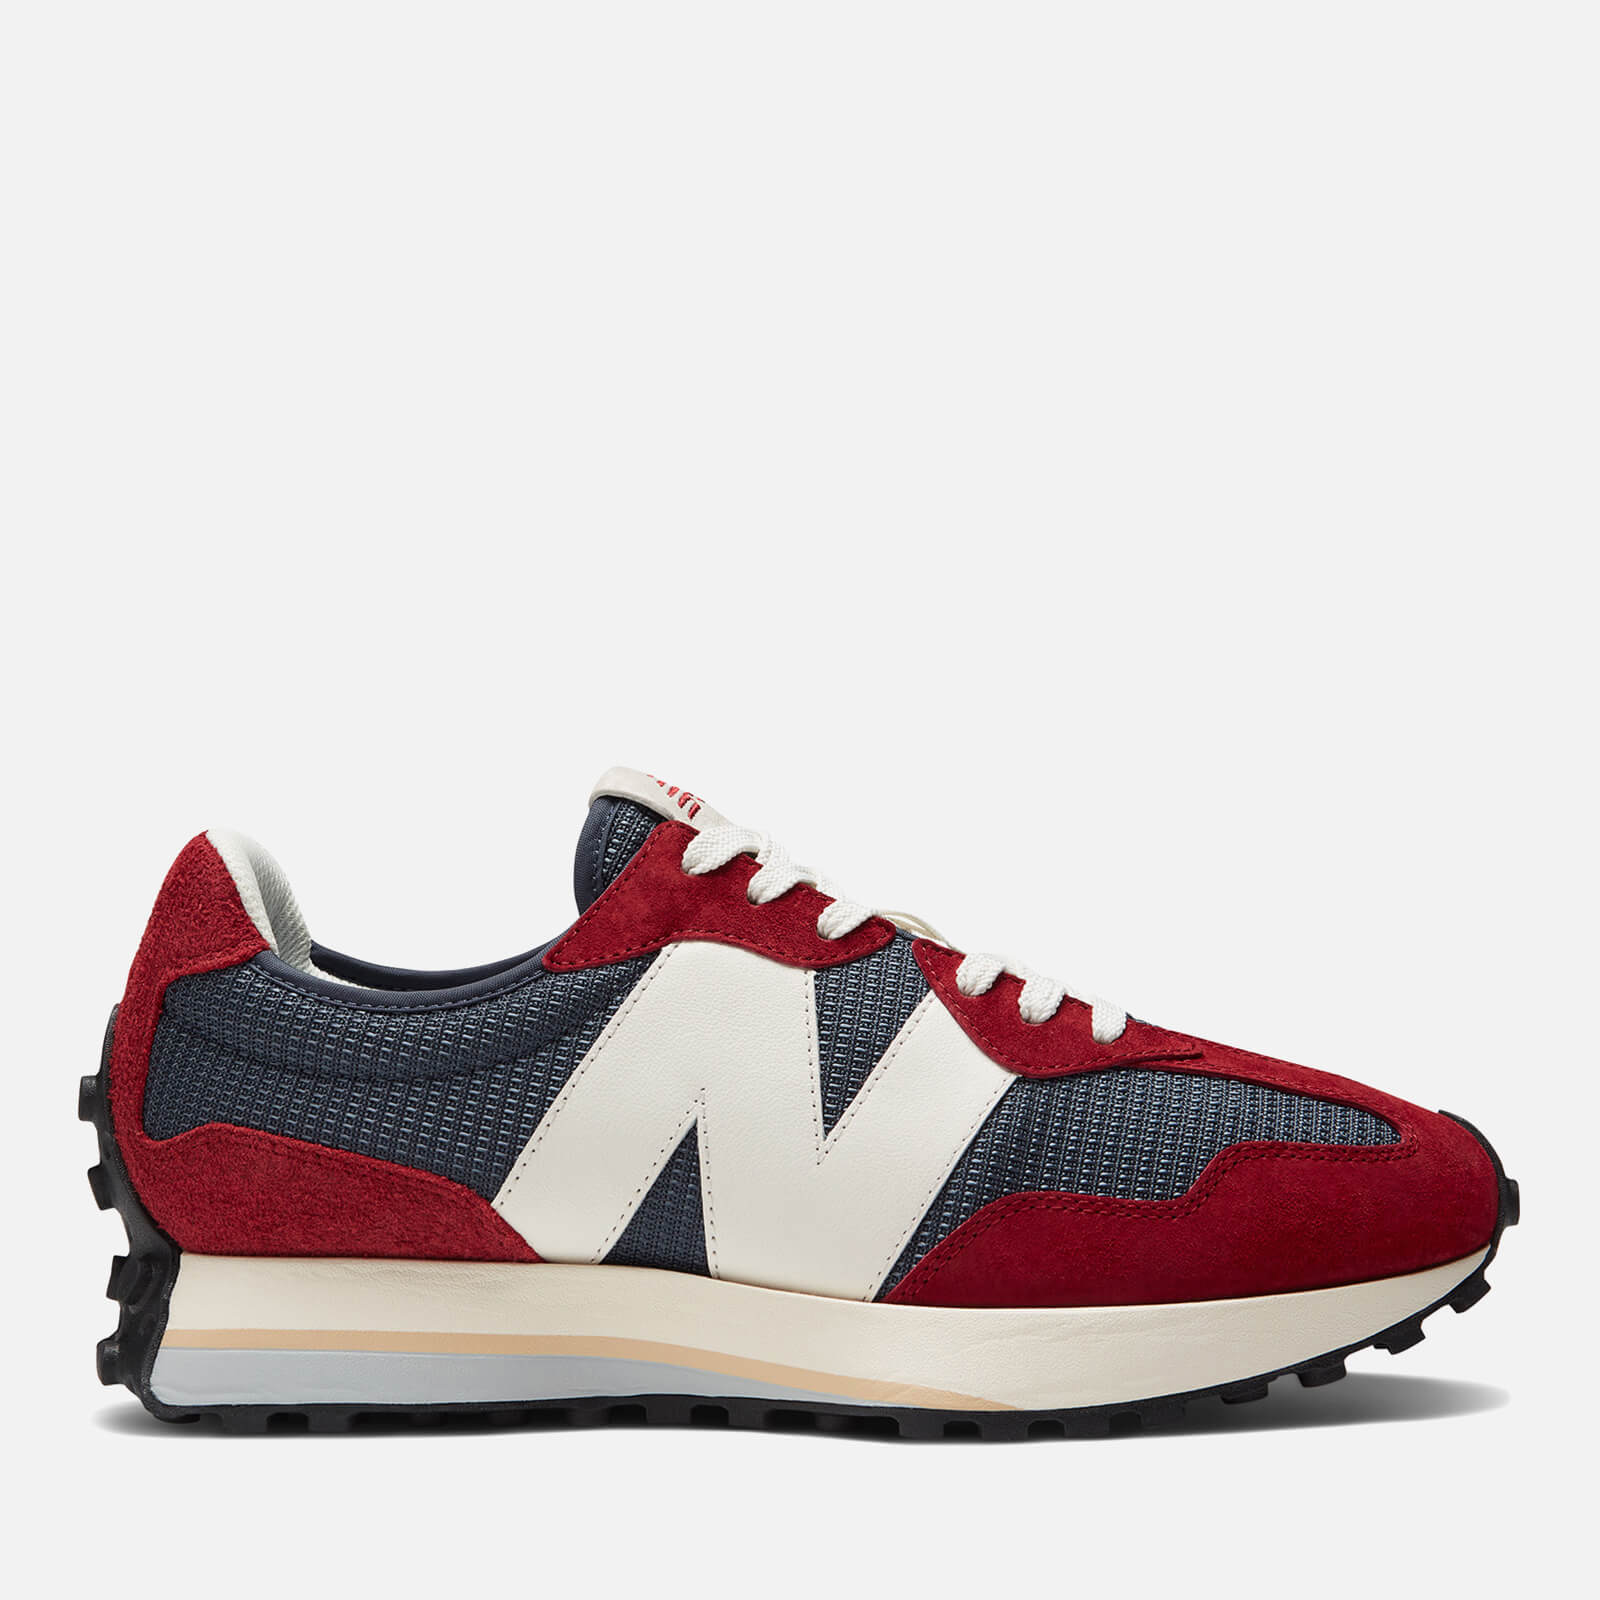 New Balance Men's 327 Archive Pack Trainers - NB Navy - UK 7